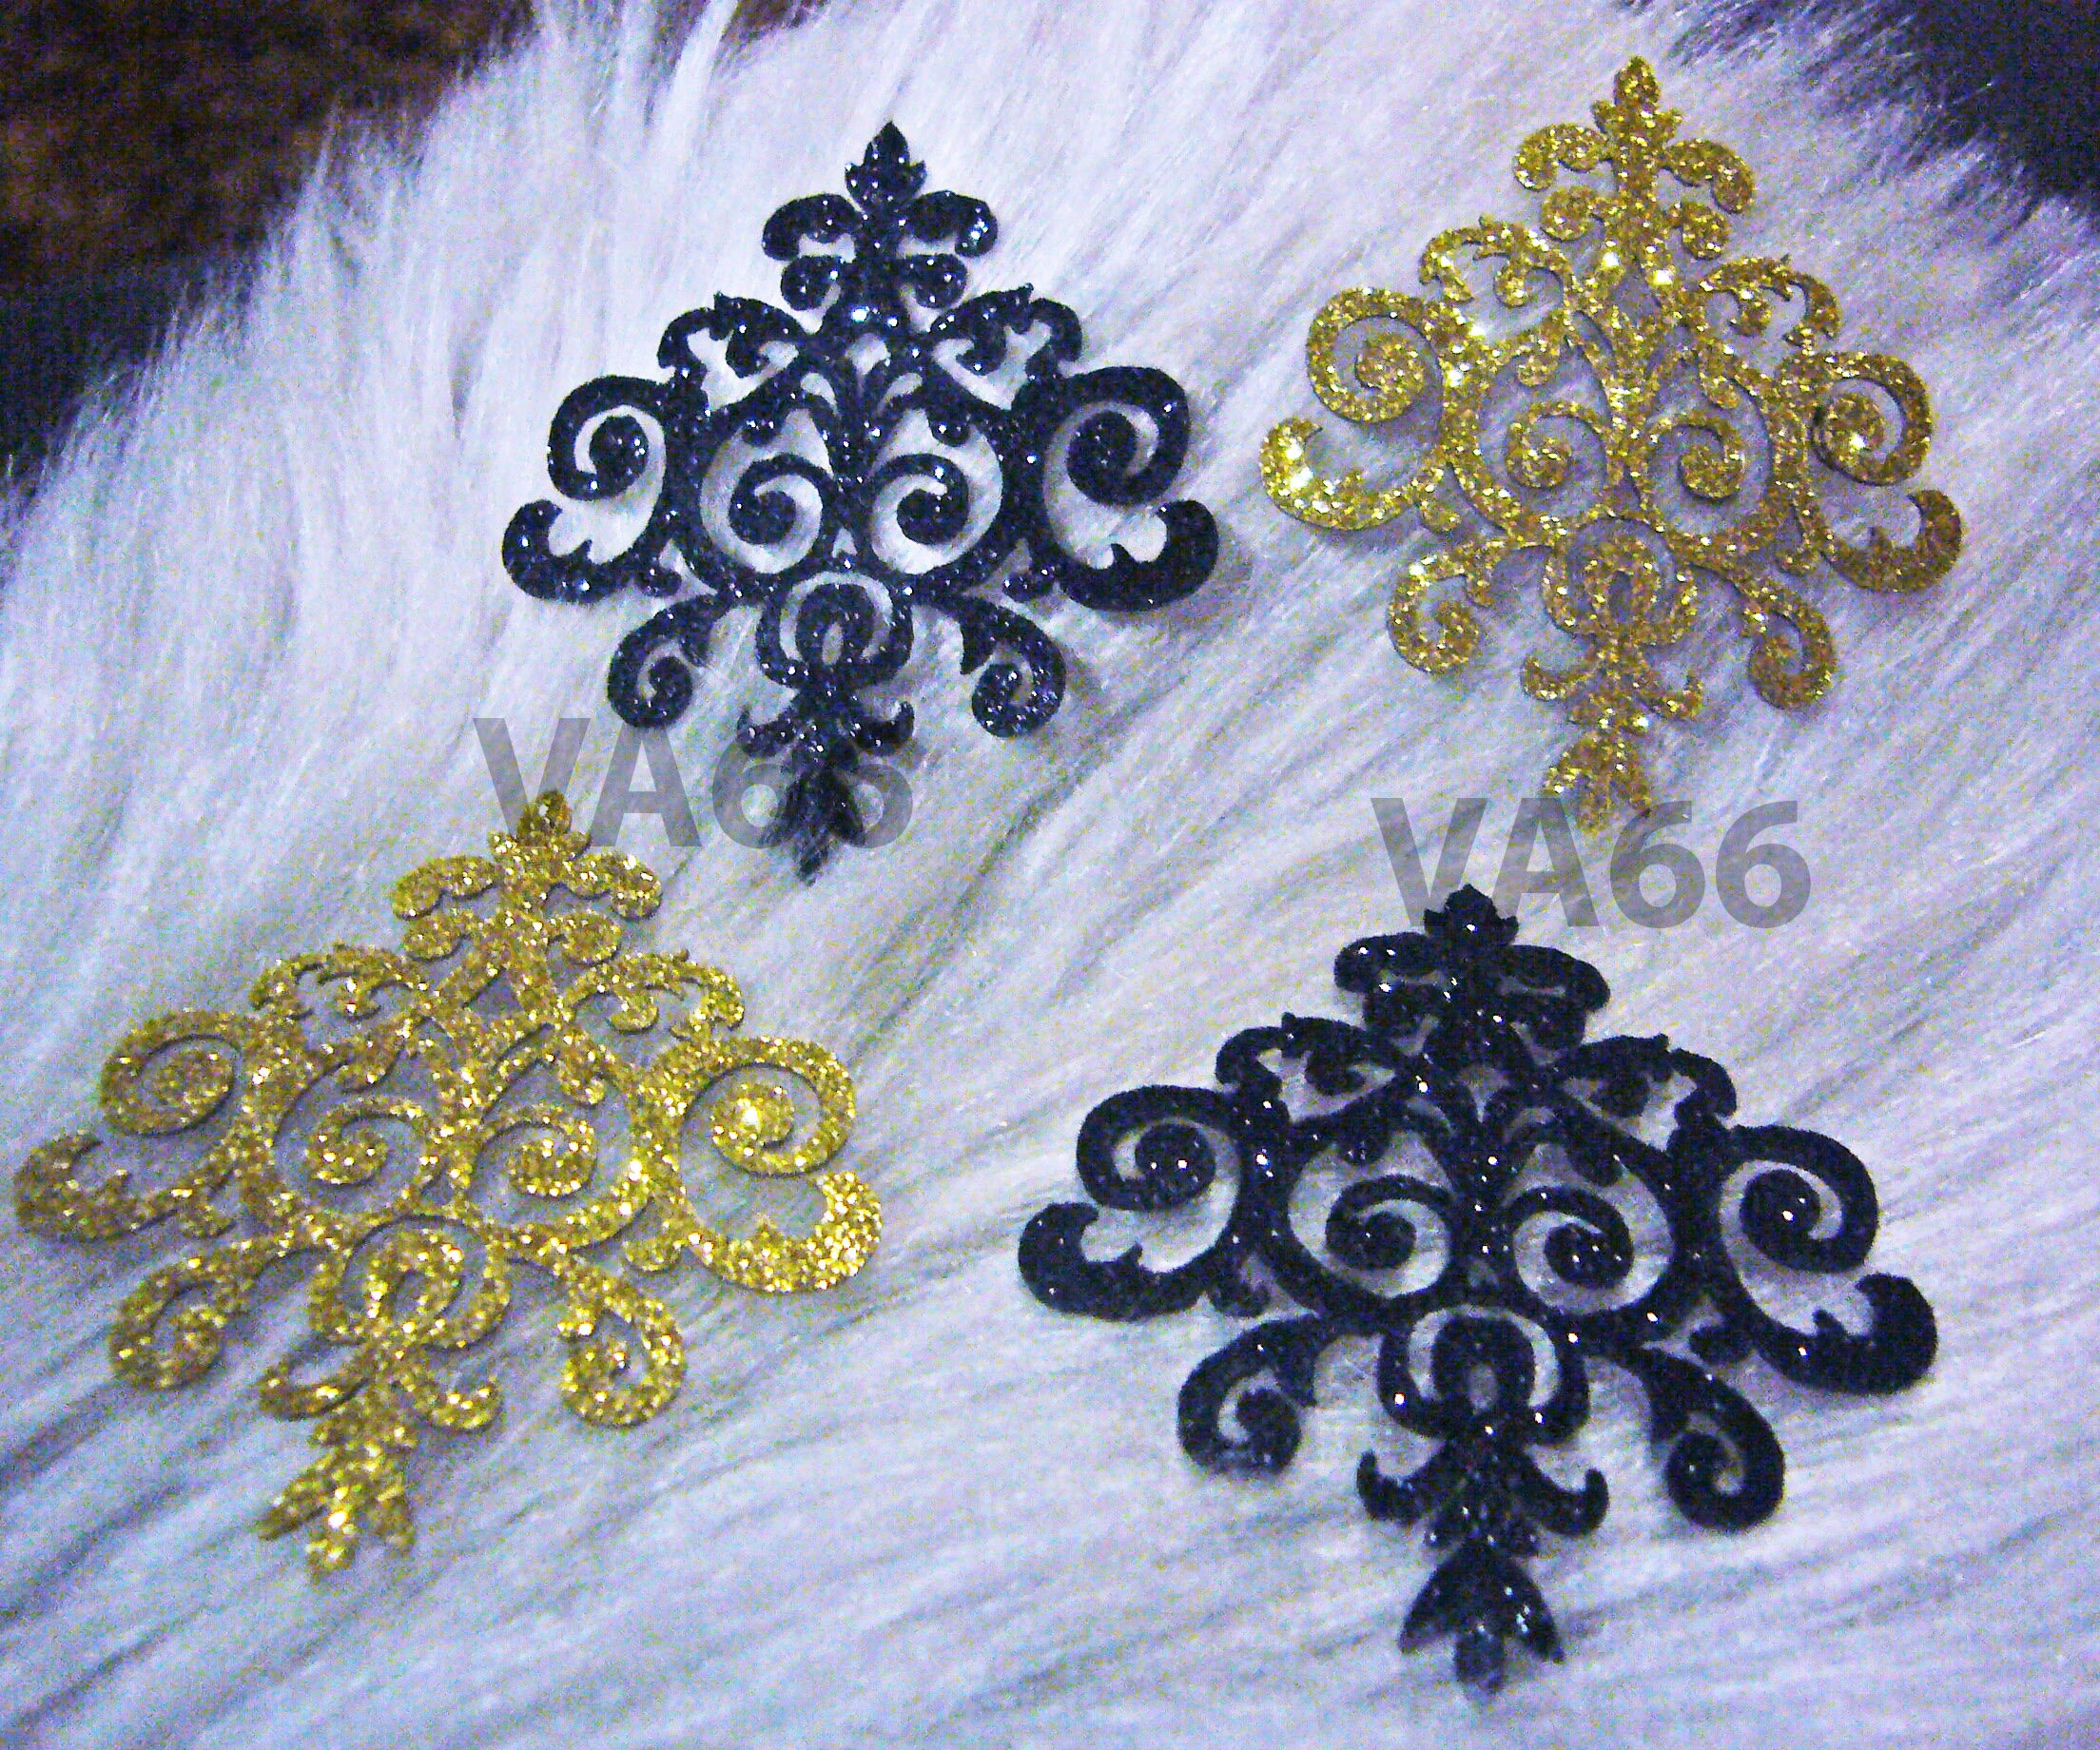 5p Glitter Gold Black Iron on Patch Applique Dokoh Vintage Look Lace Motif  Heat Transfer Decals Stickers Embellishment Sewing Accessories GB 